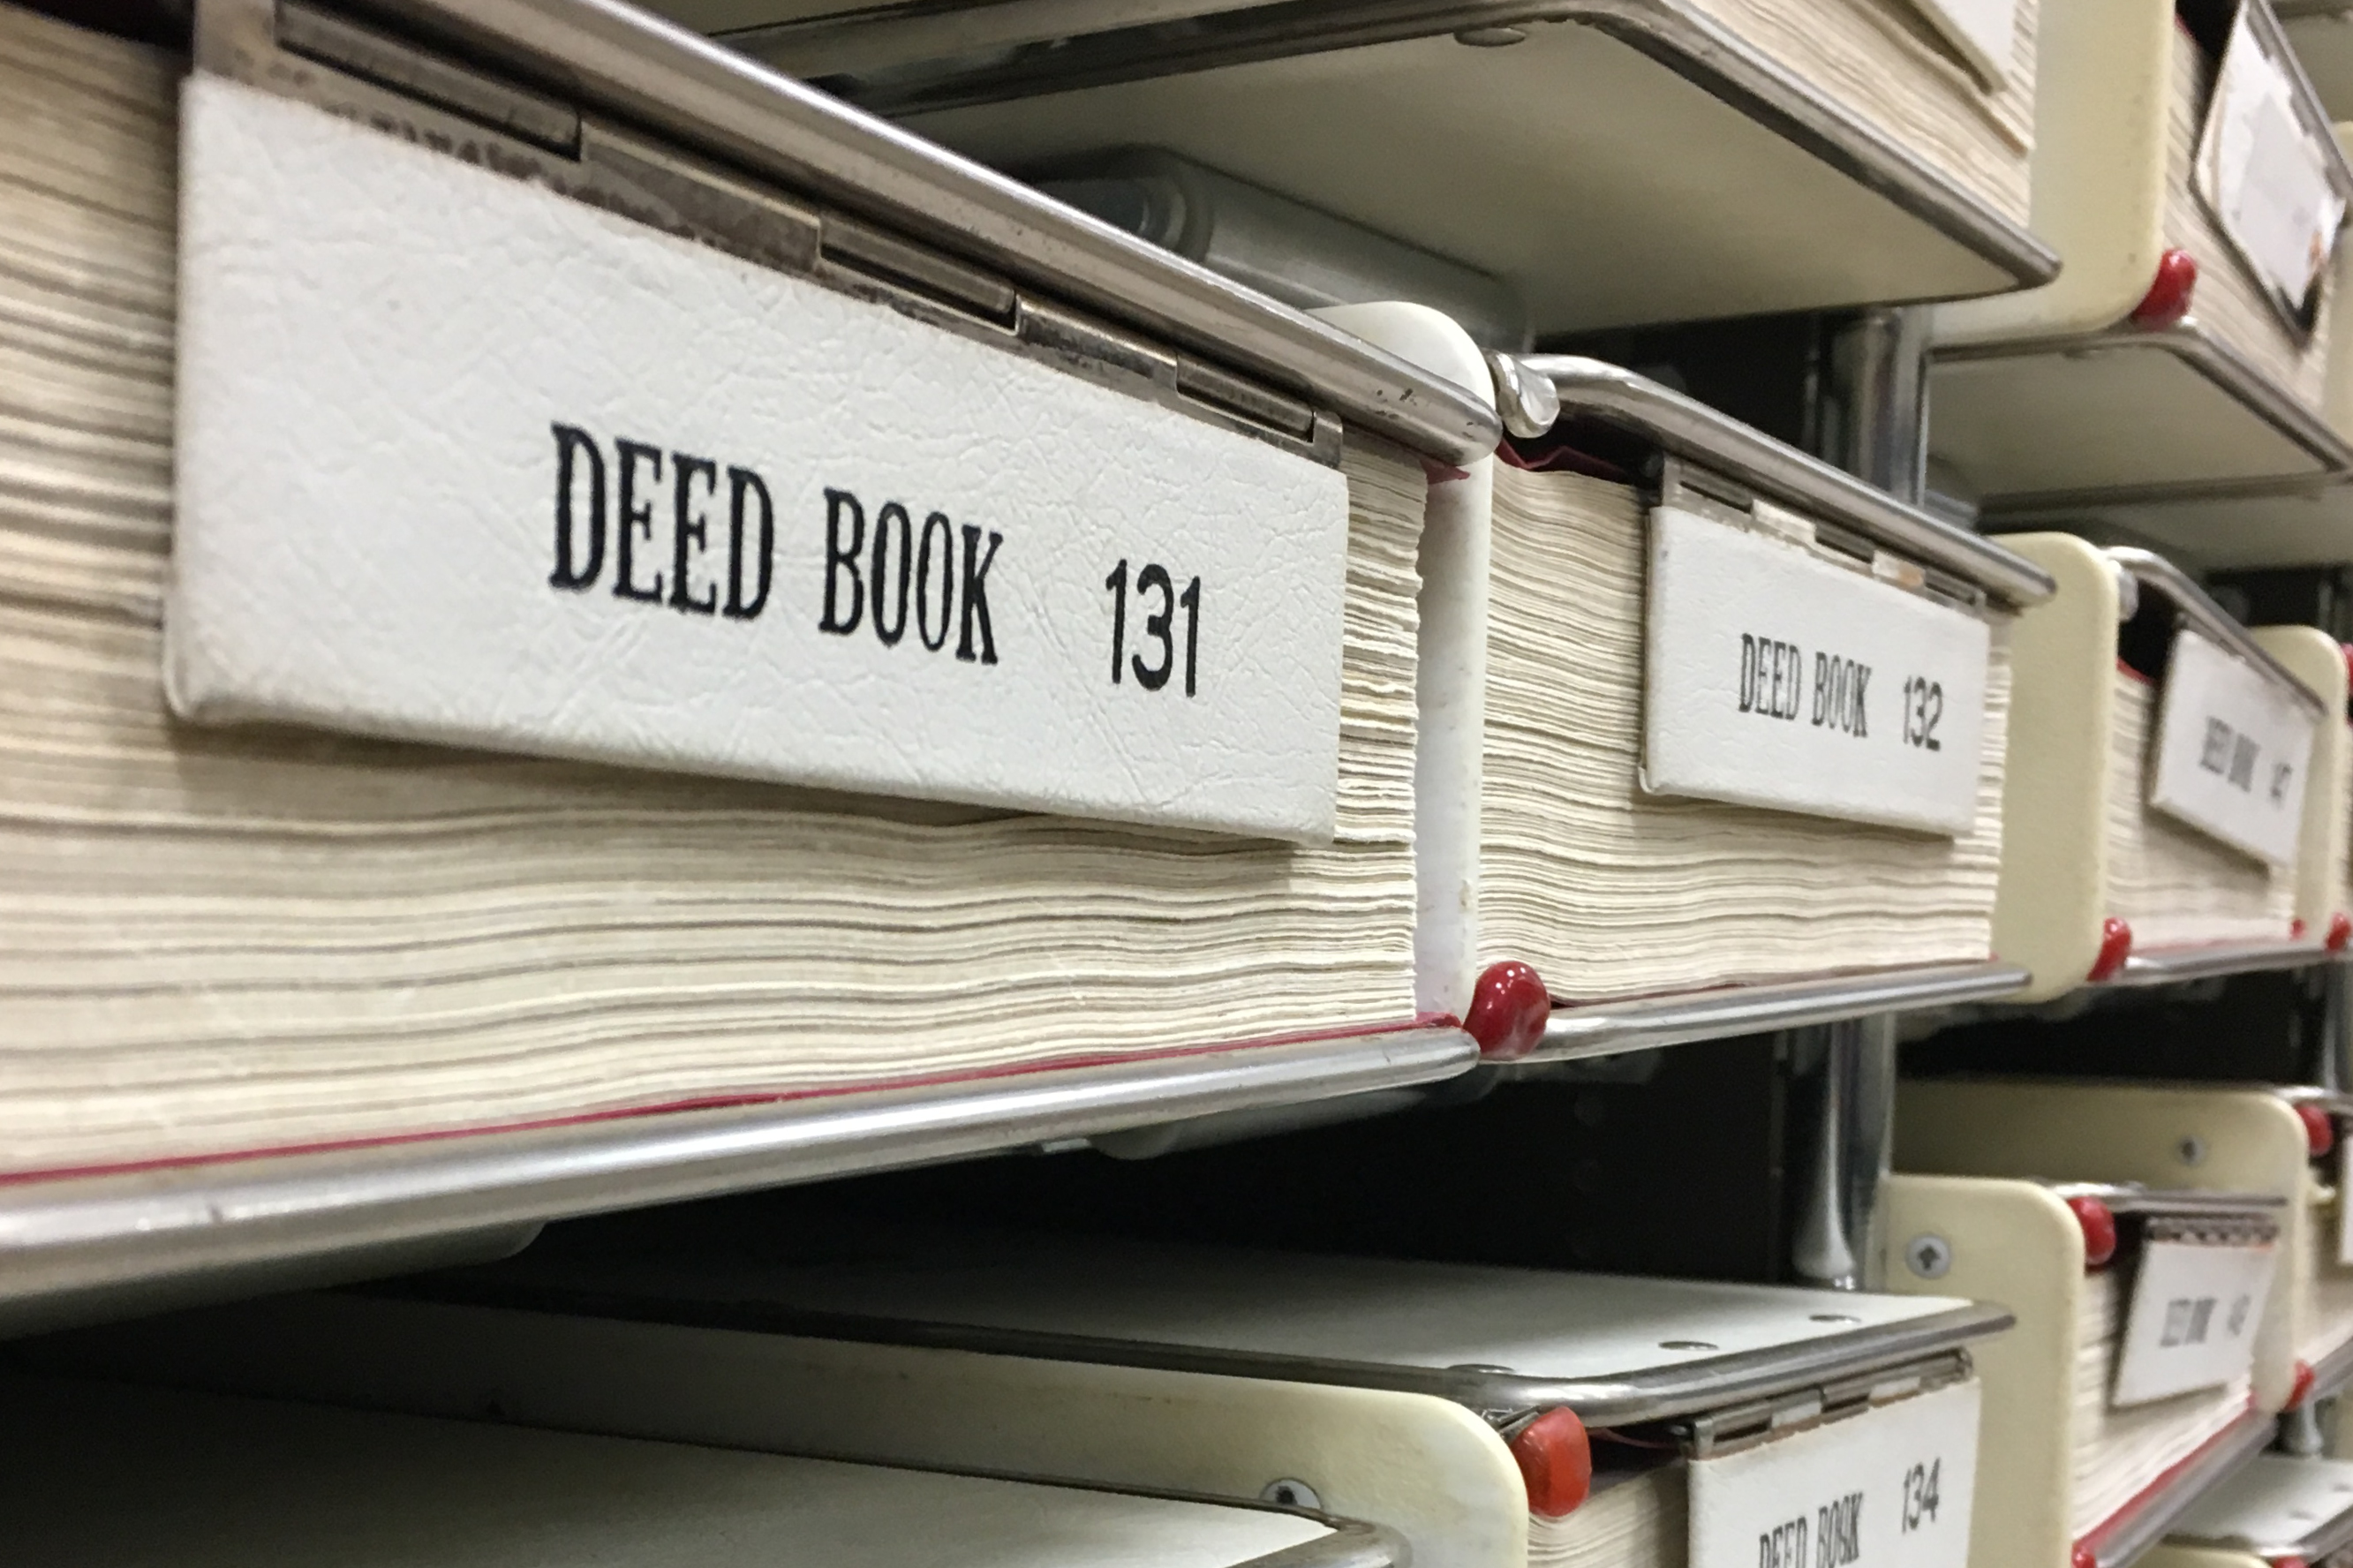 Deed books in the Clerk’s Office of the Circuit Court of Lunenburg County, Virginia, where the attorneys at Hawthorne & Hawthorne frequently handle real estate matters.